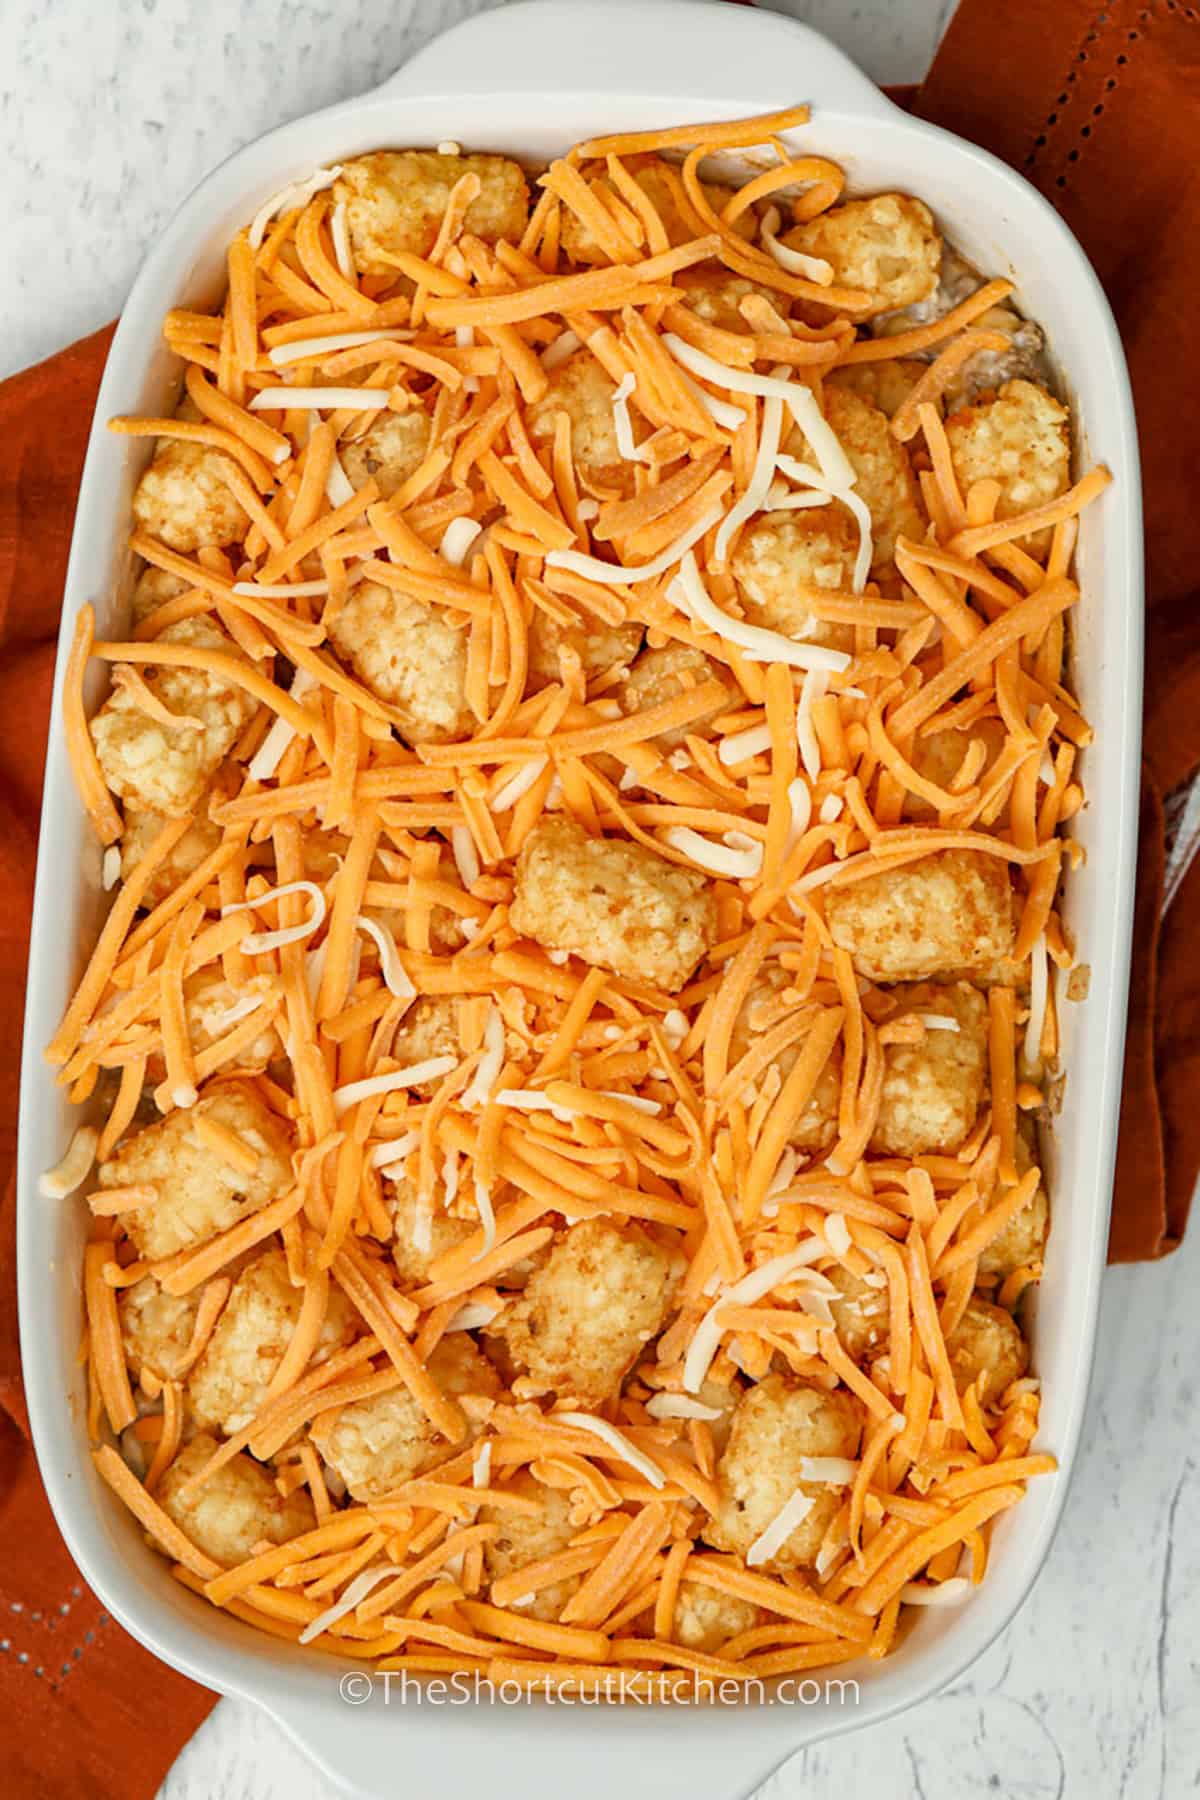 adding cheese and tater tots to Cowboy Casserole dish